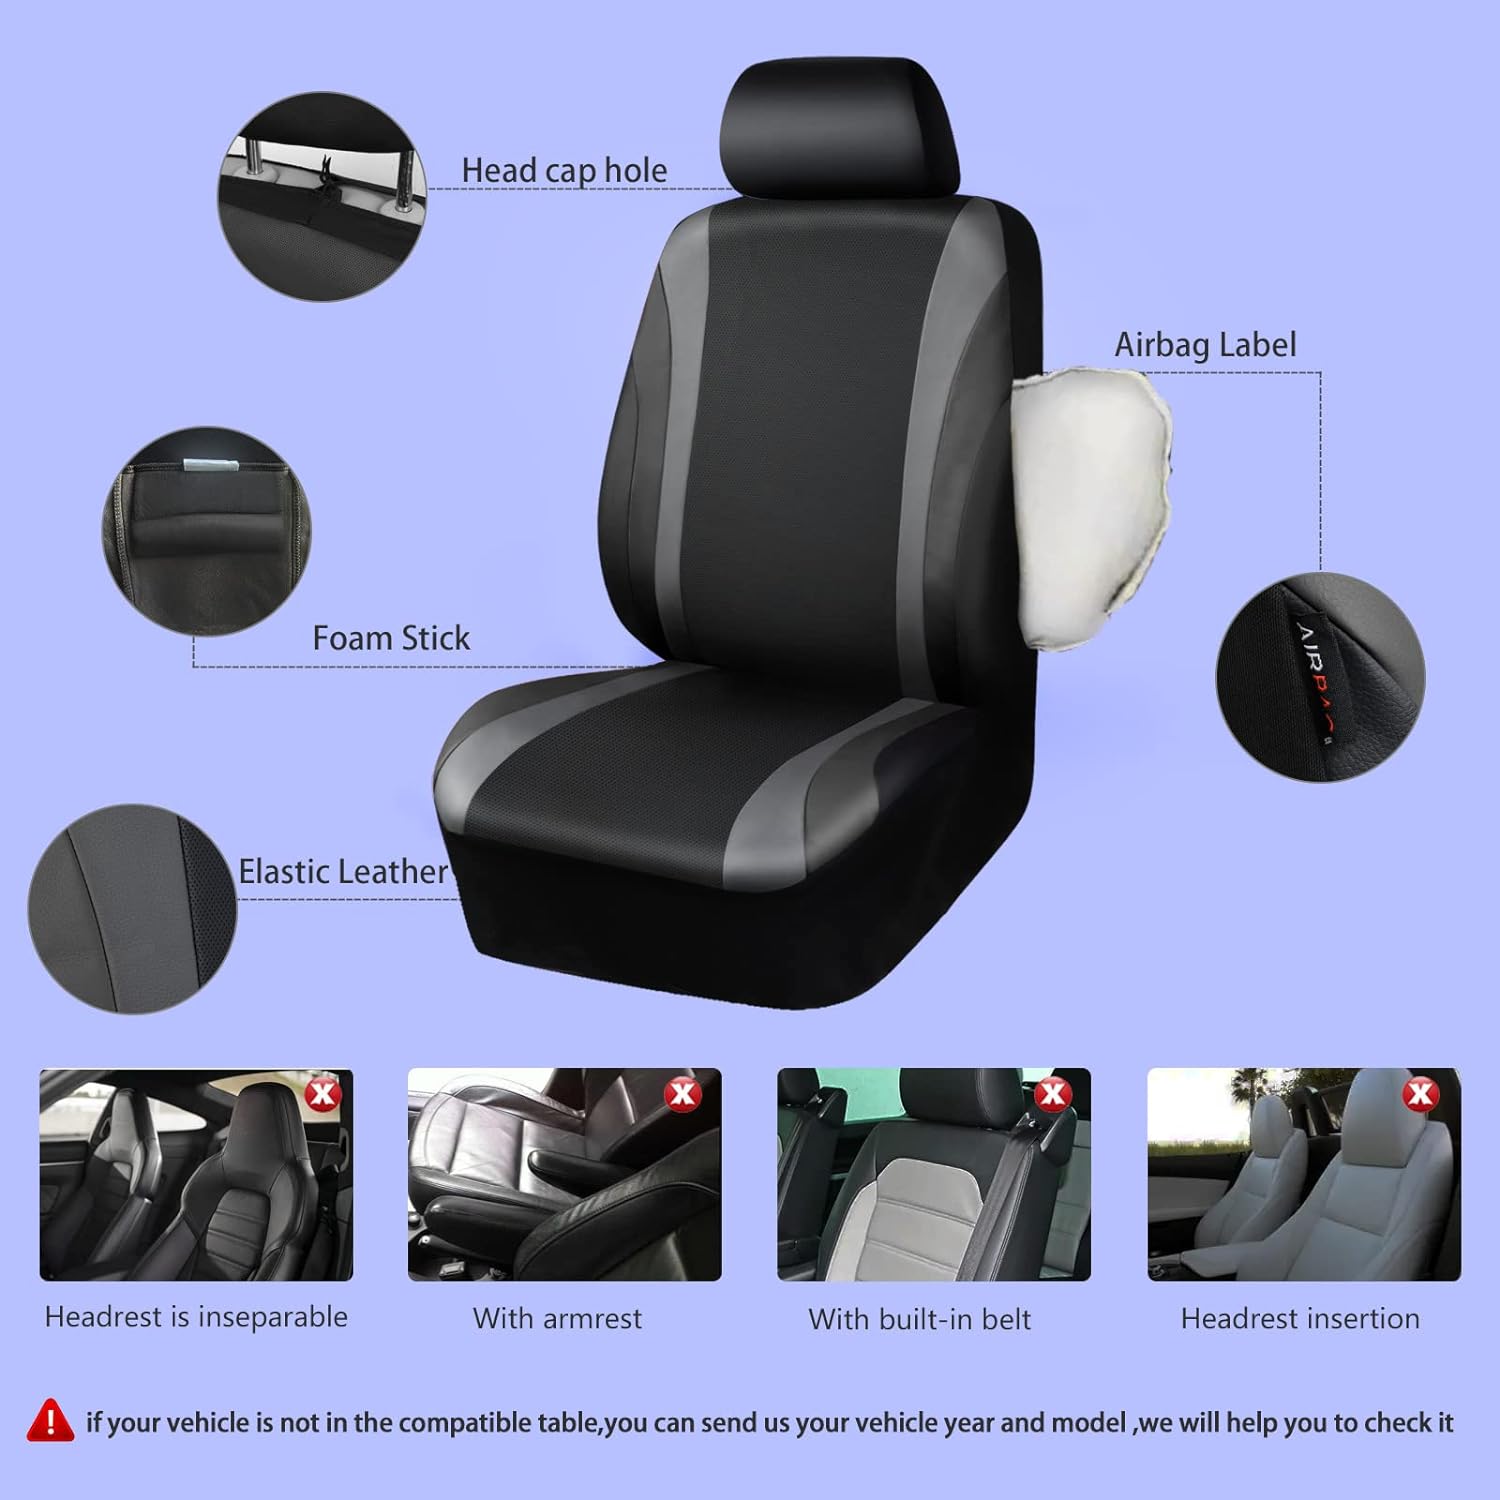 CAR PASS Line Rider Leather Car Seat Cover and Steering Wheel Cover Combo Fits for 95% Truck, SUV, Sedan. 14.5-15 Inch Anti-Slip Desgin. 3 Zipper Bench. (Black and Gray)